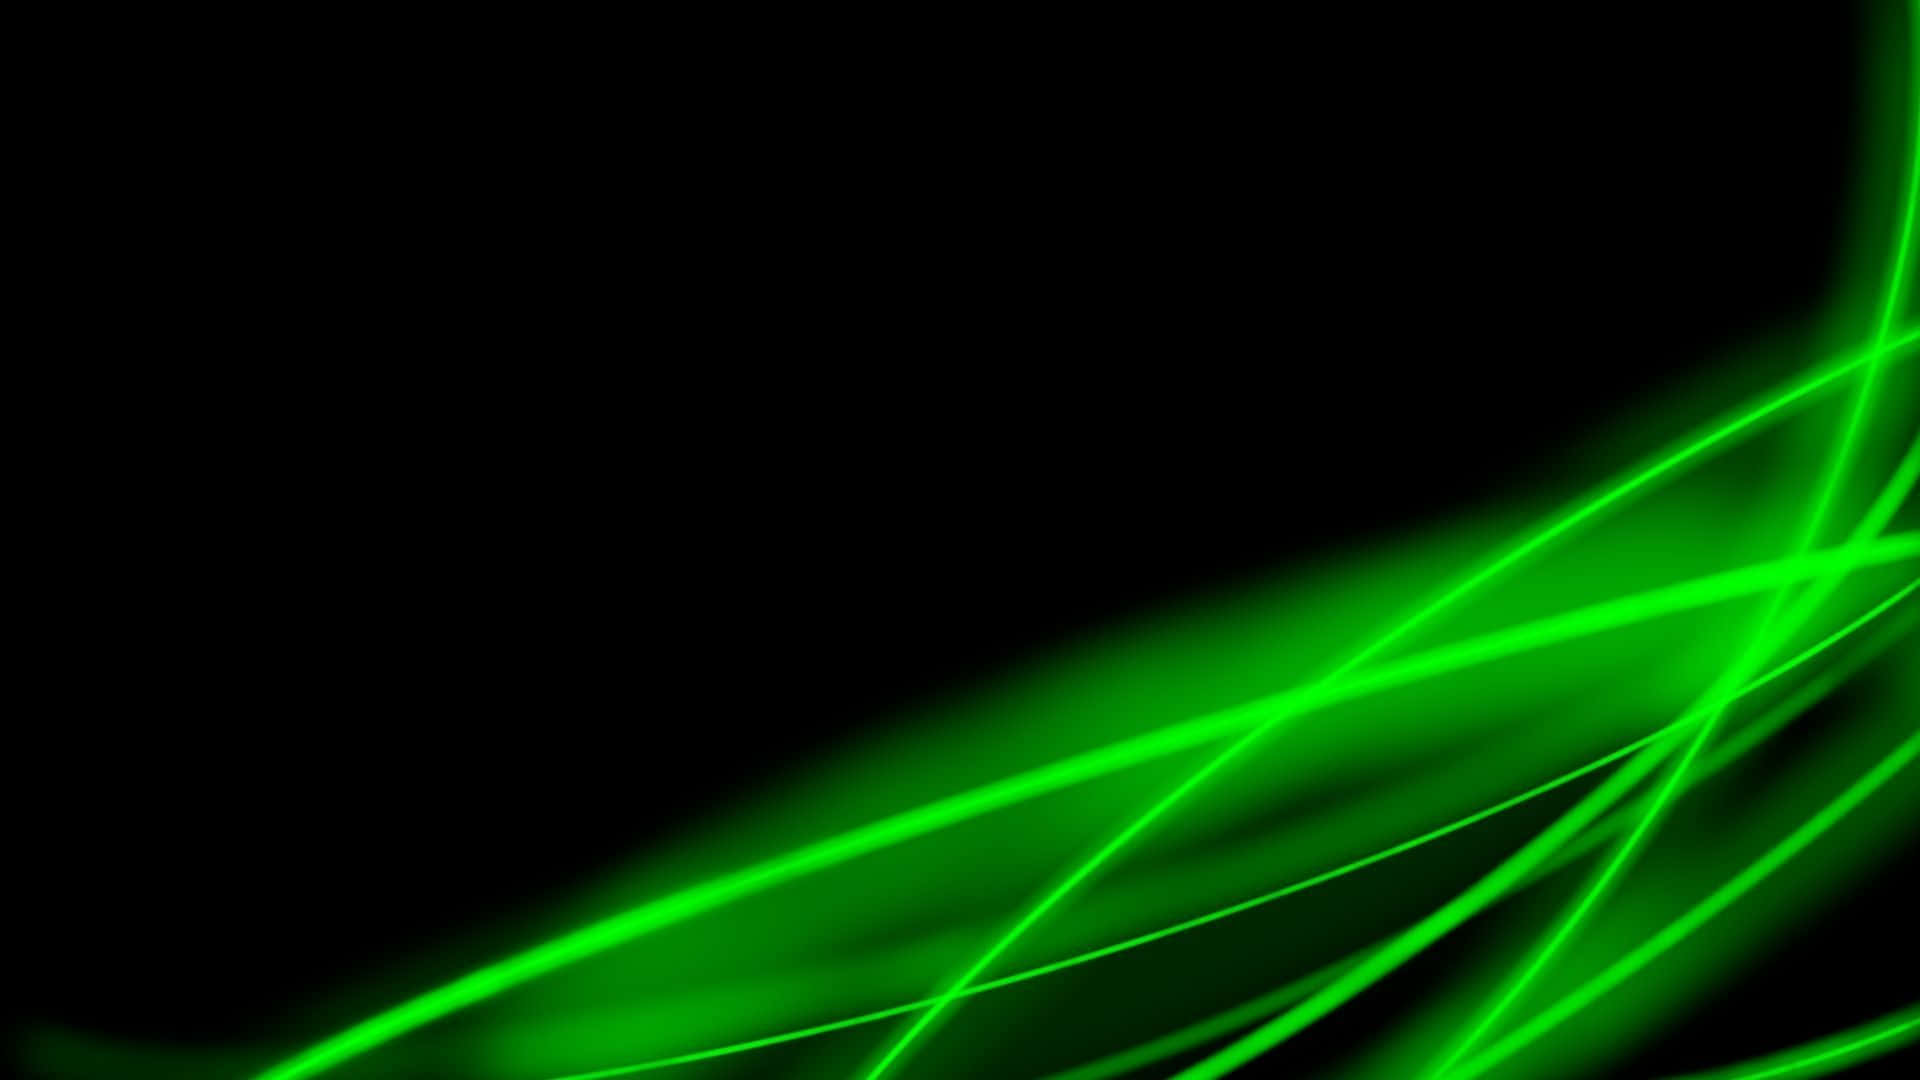 Lime Green Line In Green And Black Background